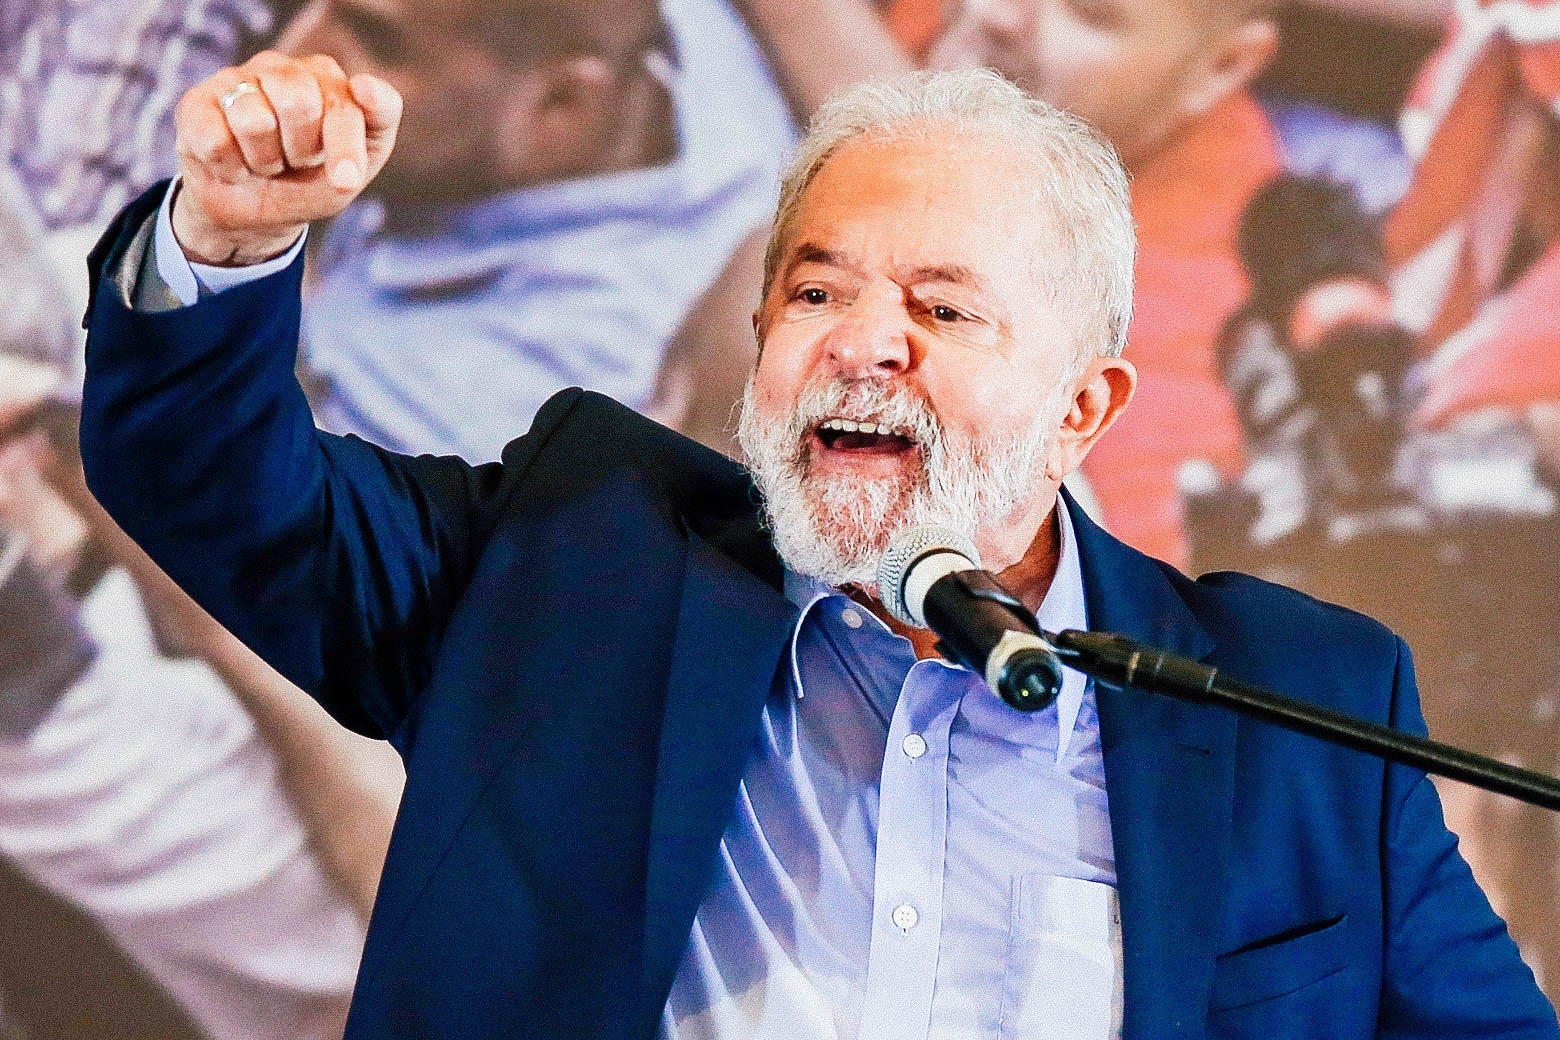 Lula raises his right fist as he speaks at a mic